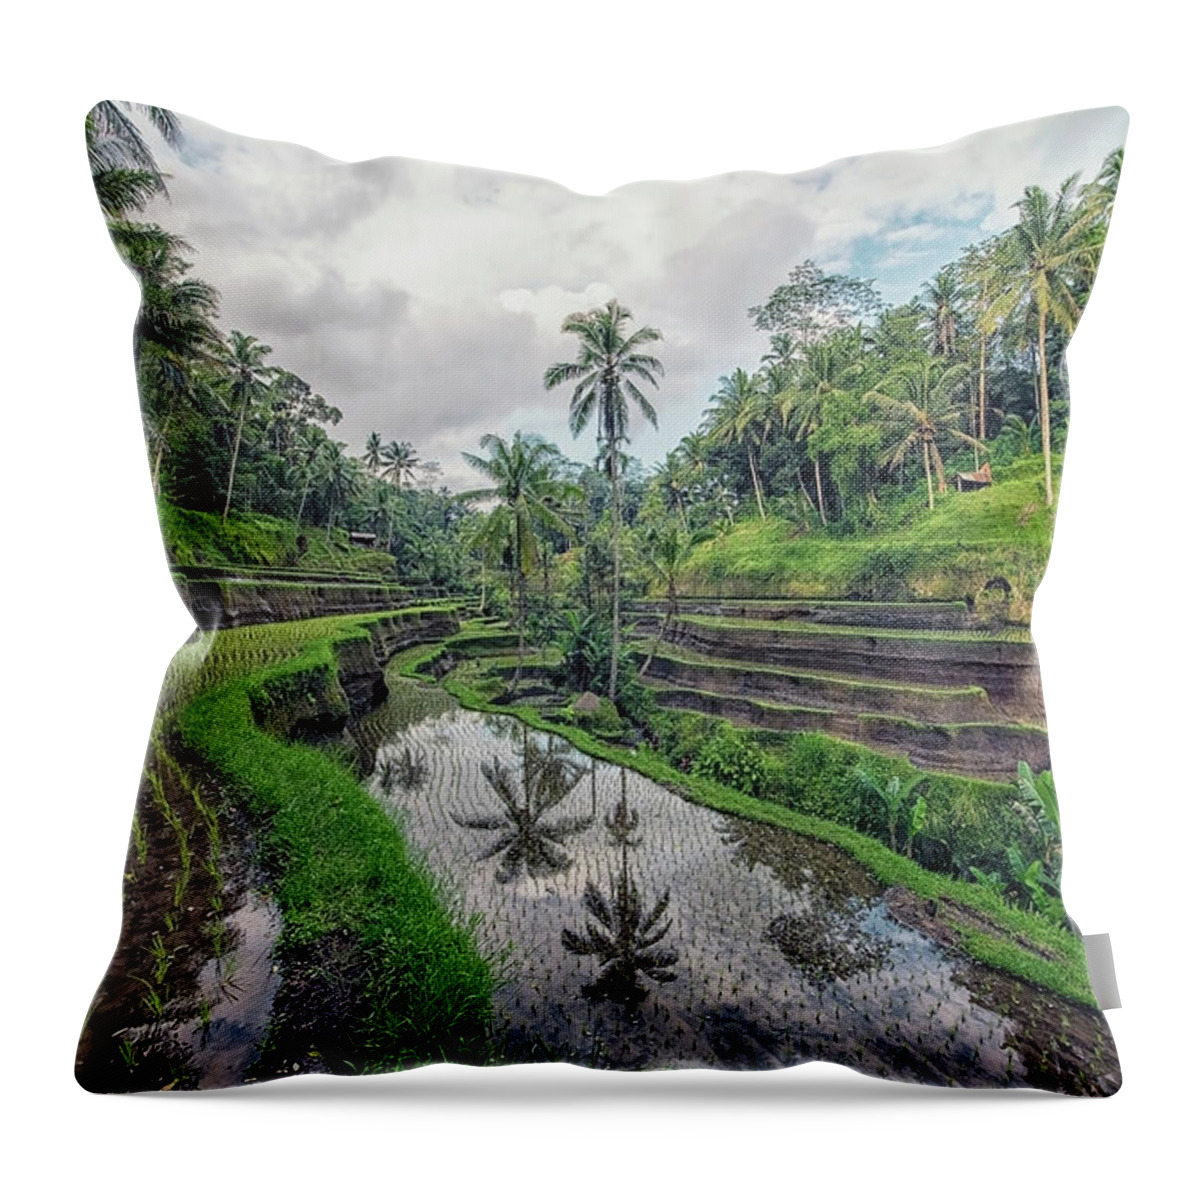 Agriculture Throw Pillow featuring the photograph Tegallalang by Manjik Pictures